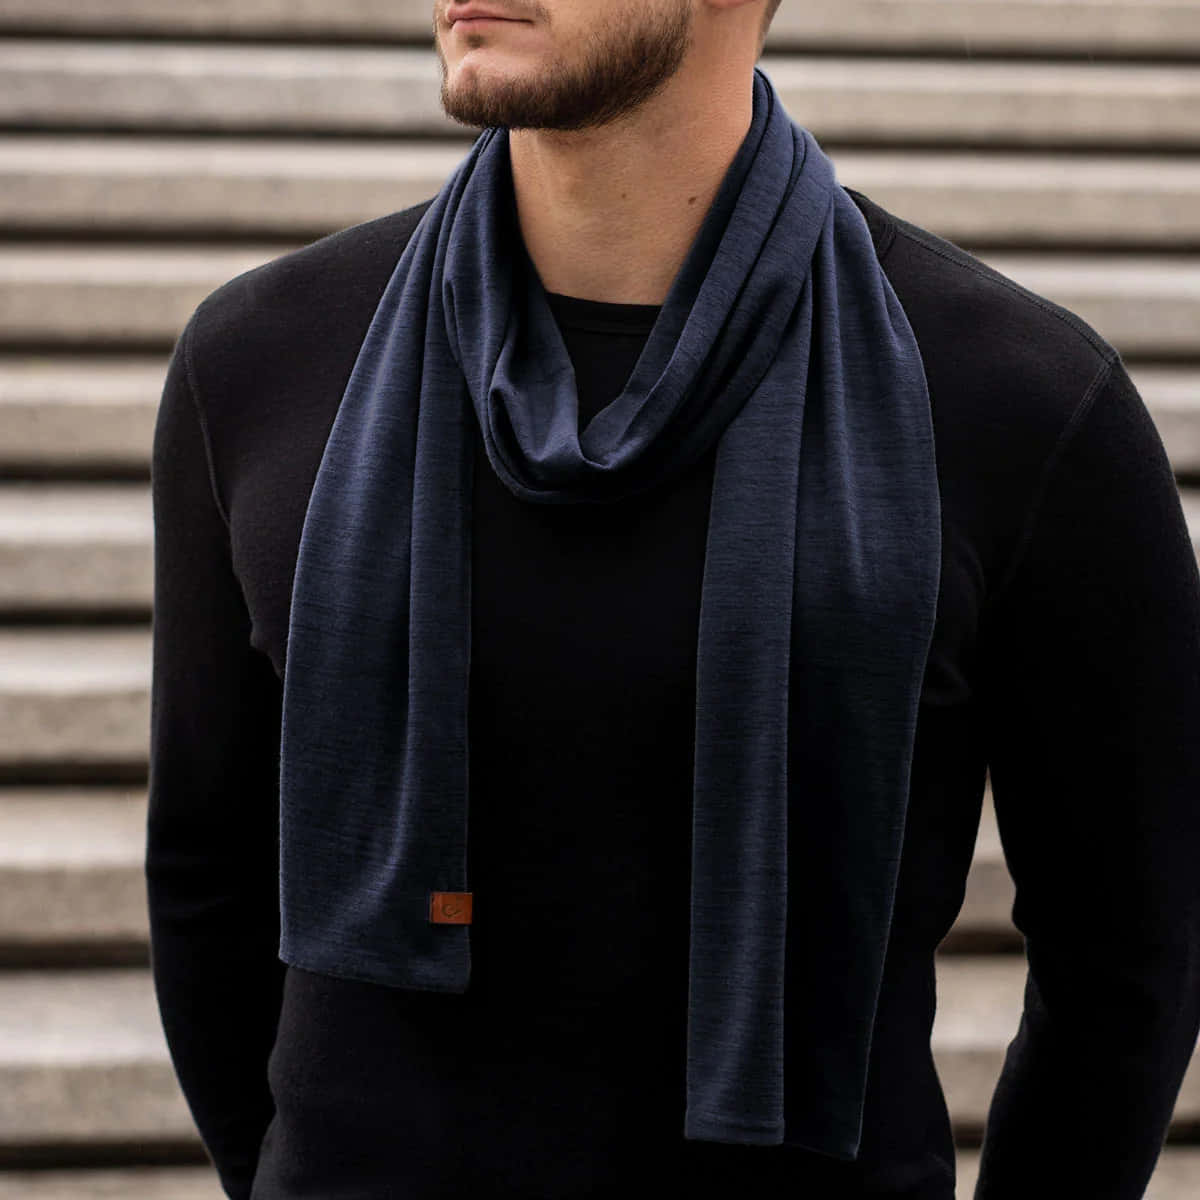 A luxurious navy blue scarf in all its glory Wallpaper